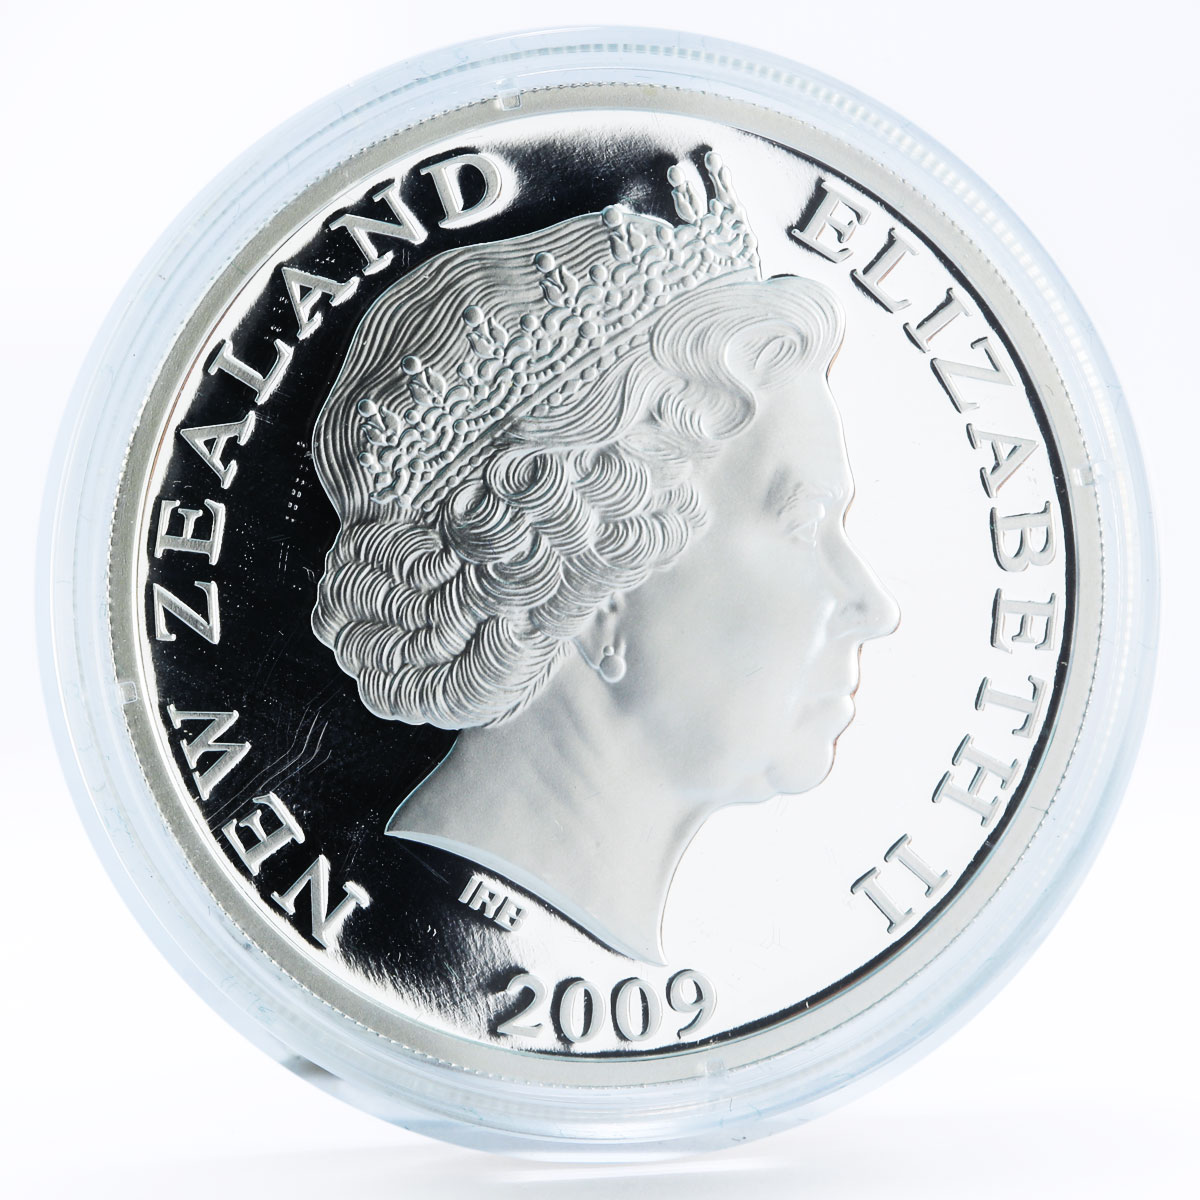 New Zealand set of 5 coins Giants of New Zealand Fauna proof silver coins 2009